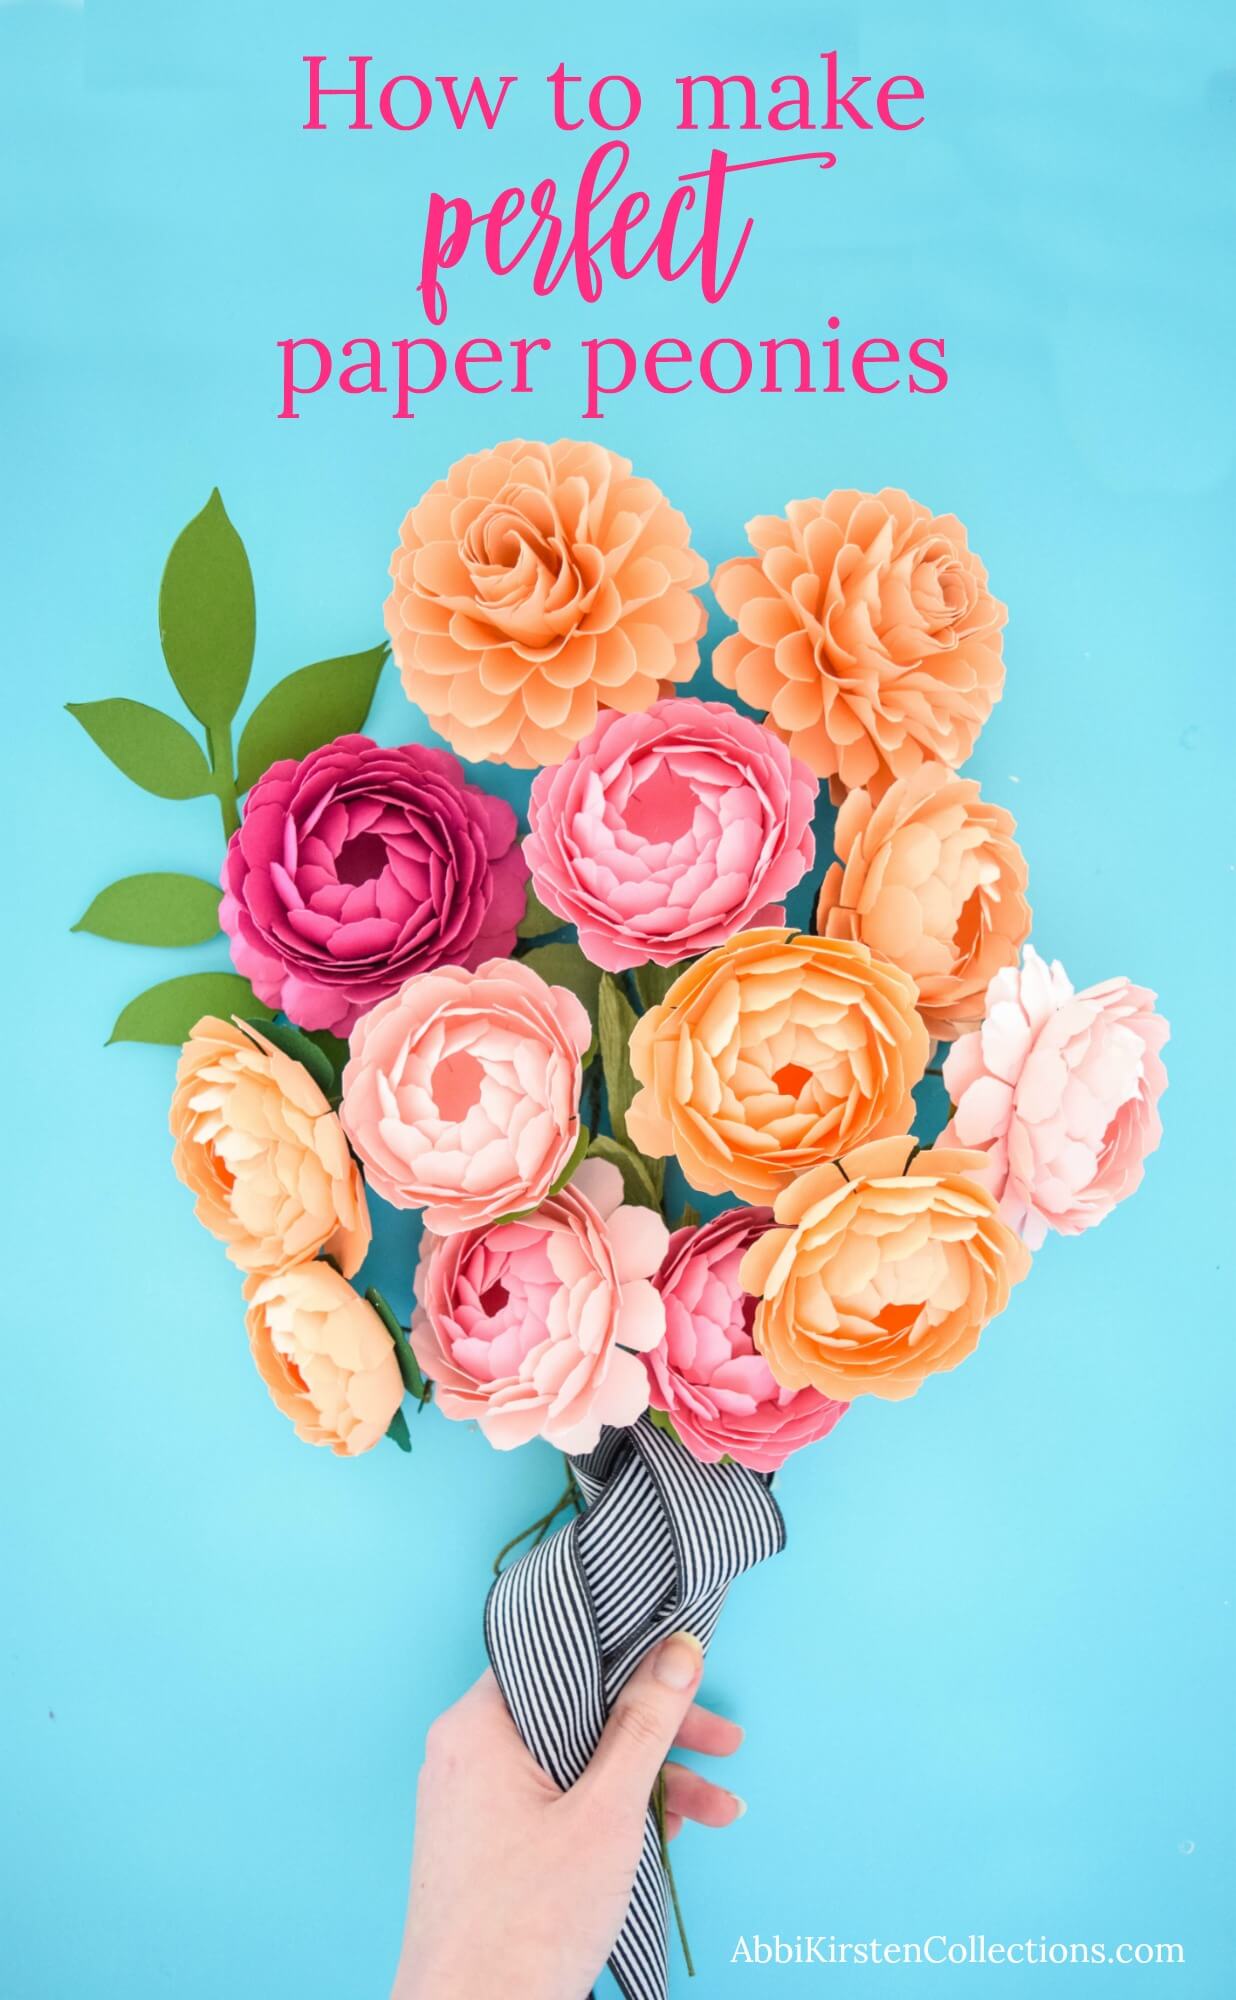 Abbi Kirsten's hand holds a bouquet of gorgeous paper peonies in red, pink, and orange. The flower stems are wrapped in a black-and-white striped ribbon. On the blue background are the words "How To Make Perfect Paper Peonies."